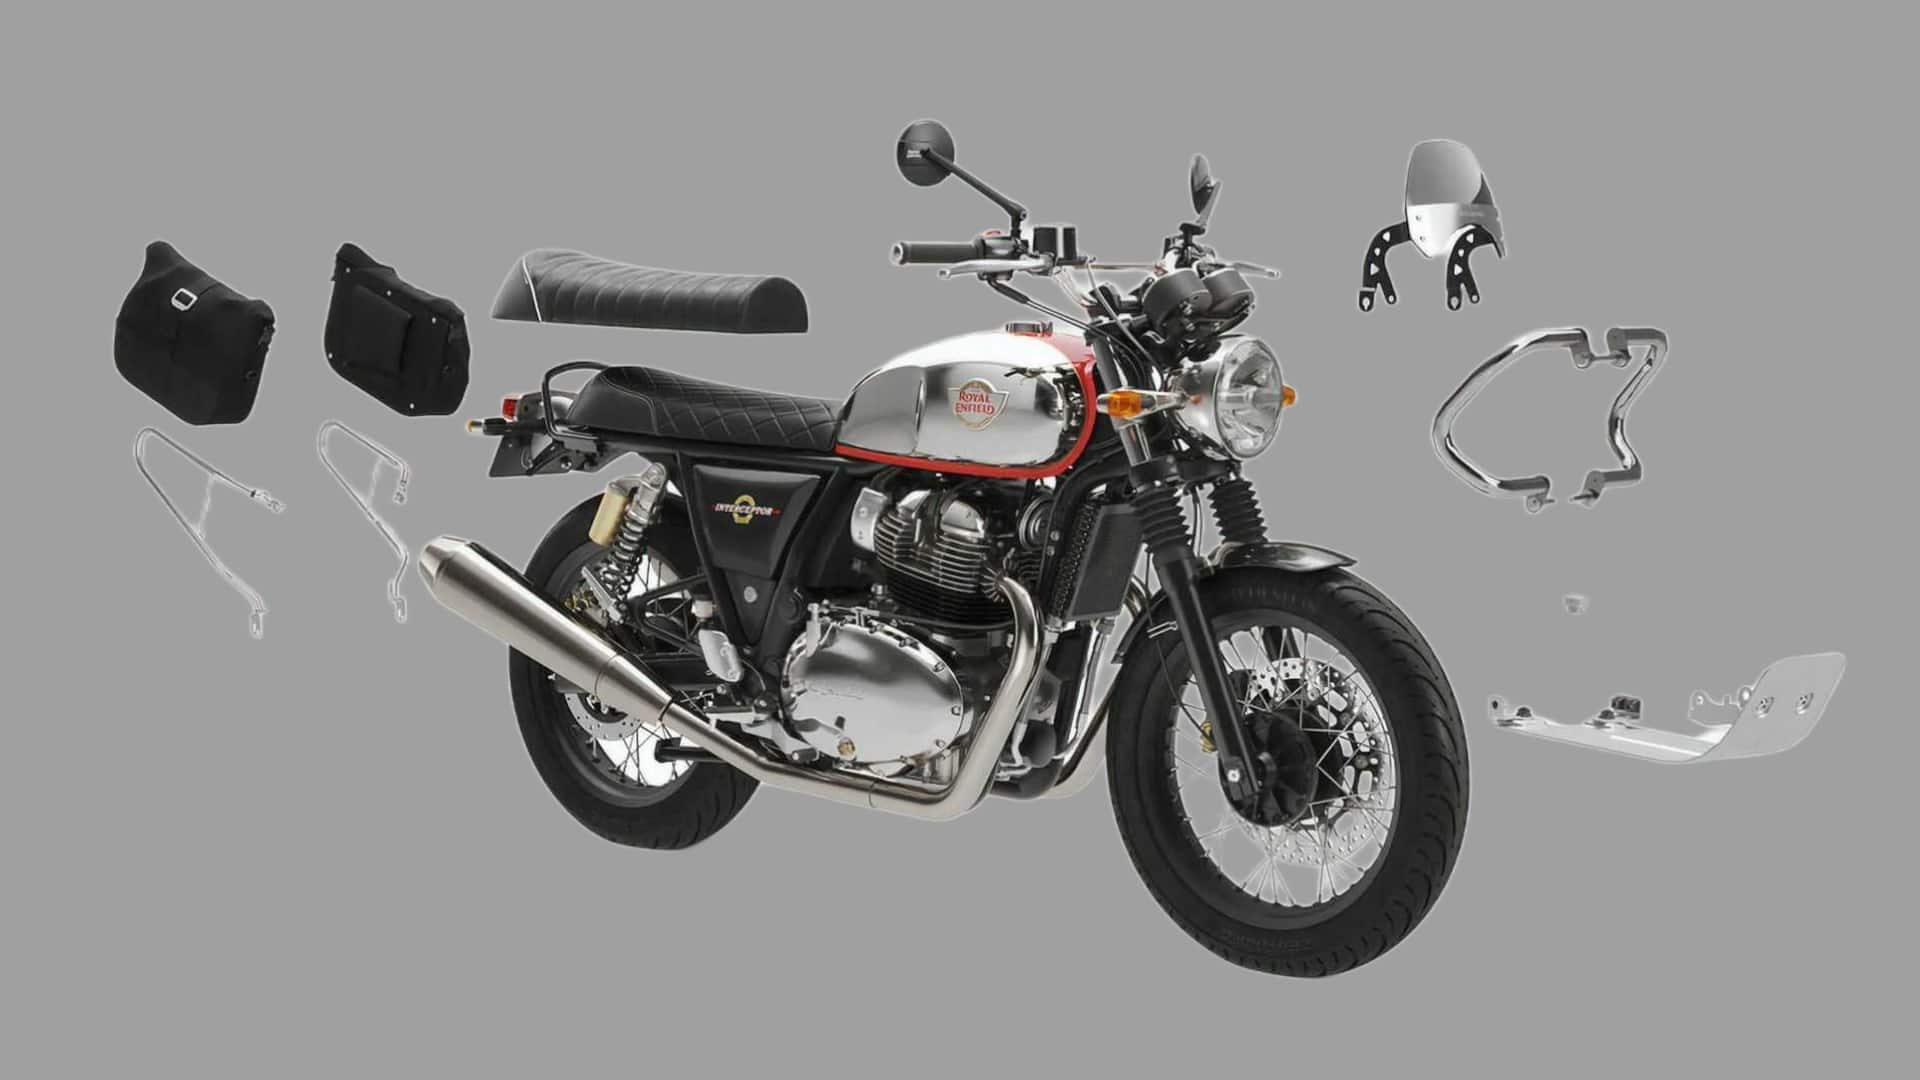 Top features of the Royal Enfield Interceptor 650 Lightning